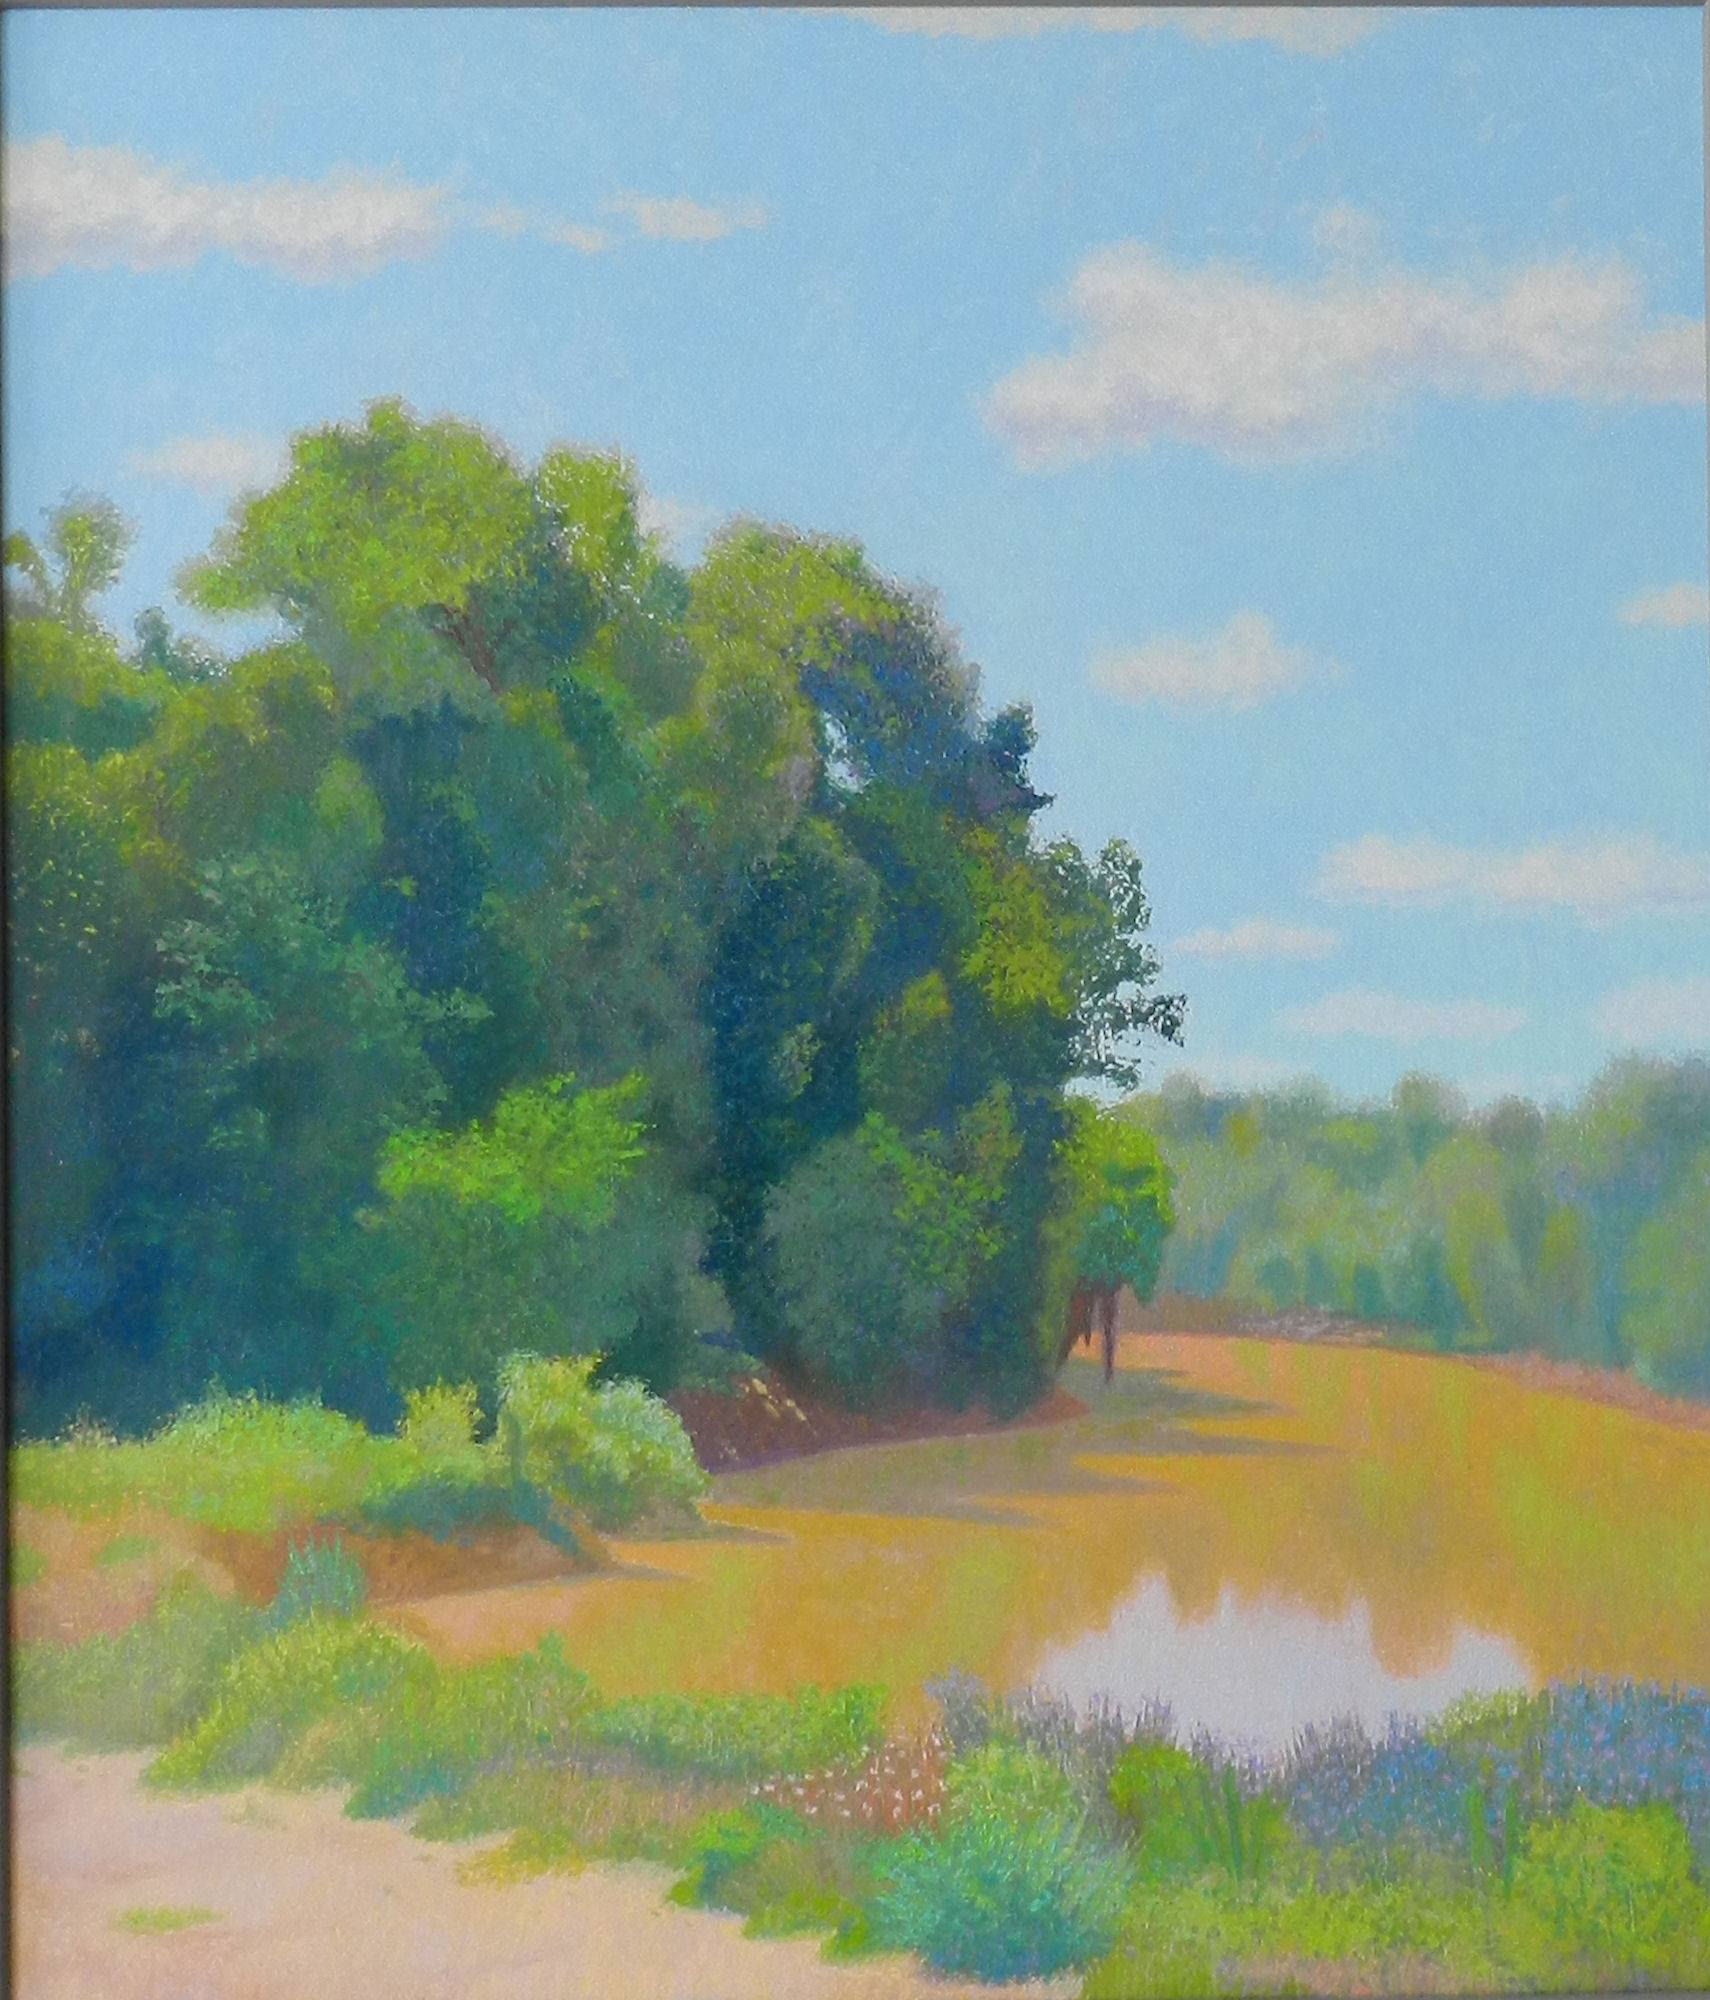 Copy of River Painting.jpg